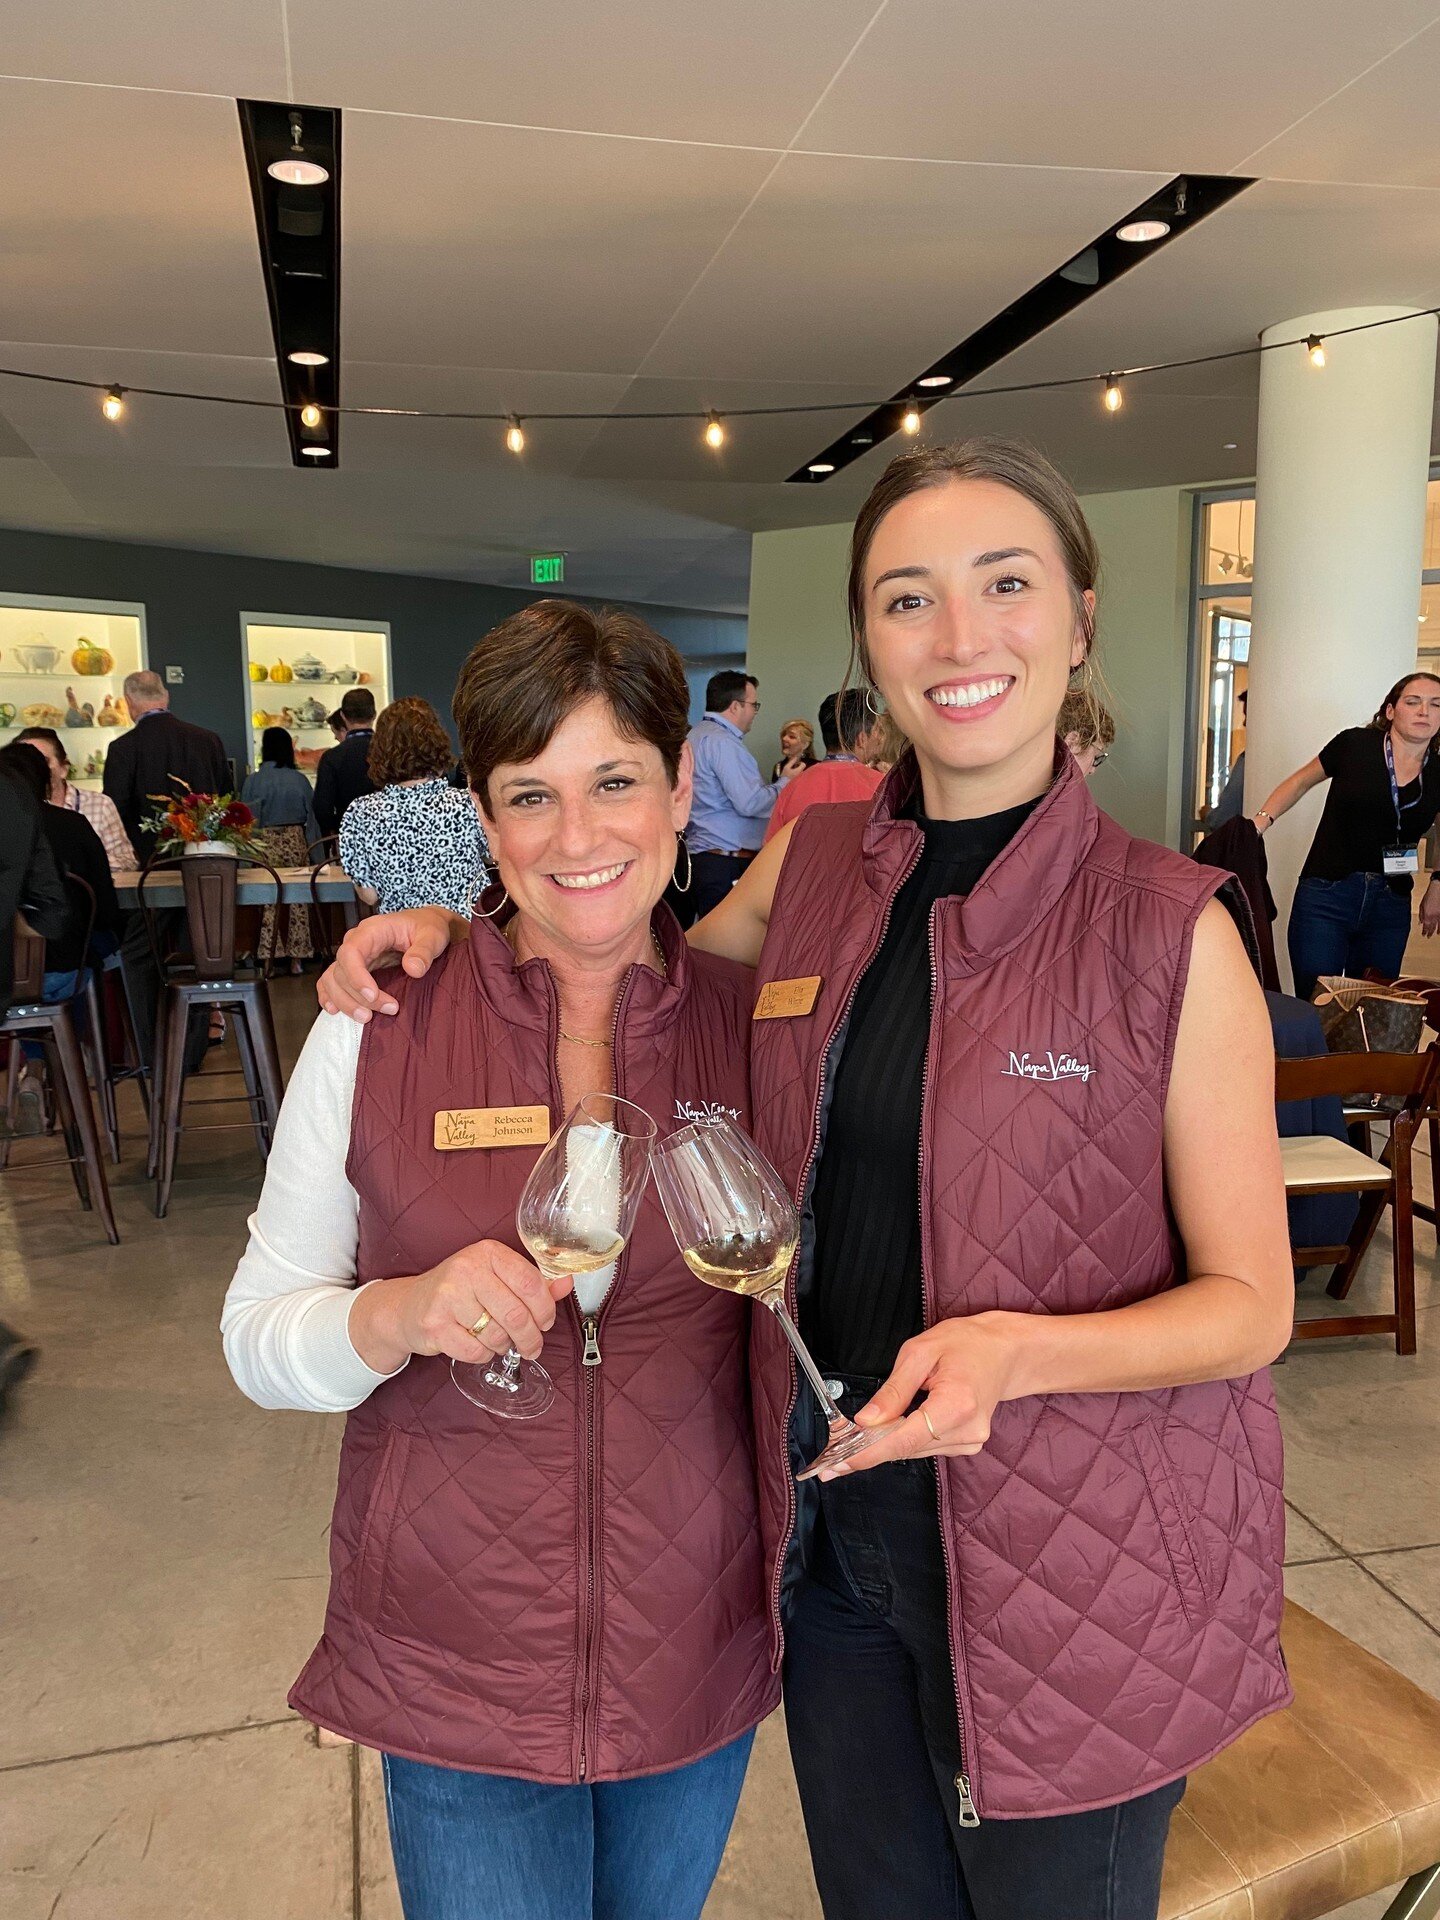 Taking a moment to #cheersthegoodlife at Visit Napa Valley&rsquo;s Destination Symposium! 🥂 Our event planning dream team, O&rsquo;Donnell Lane partner Rebecca Johnson and associate director Ella Winje, worked behind the scenes to design and oversee